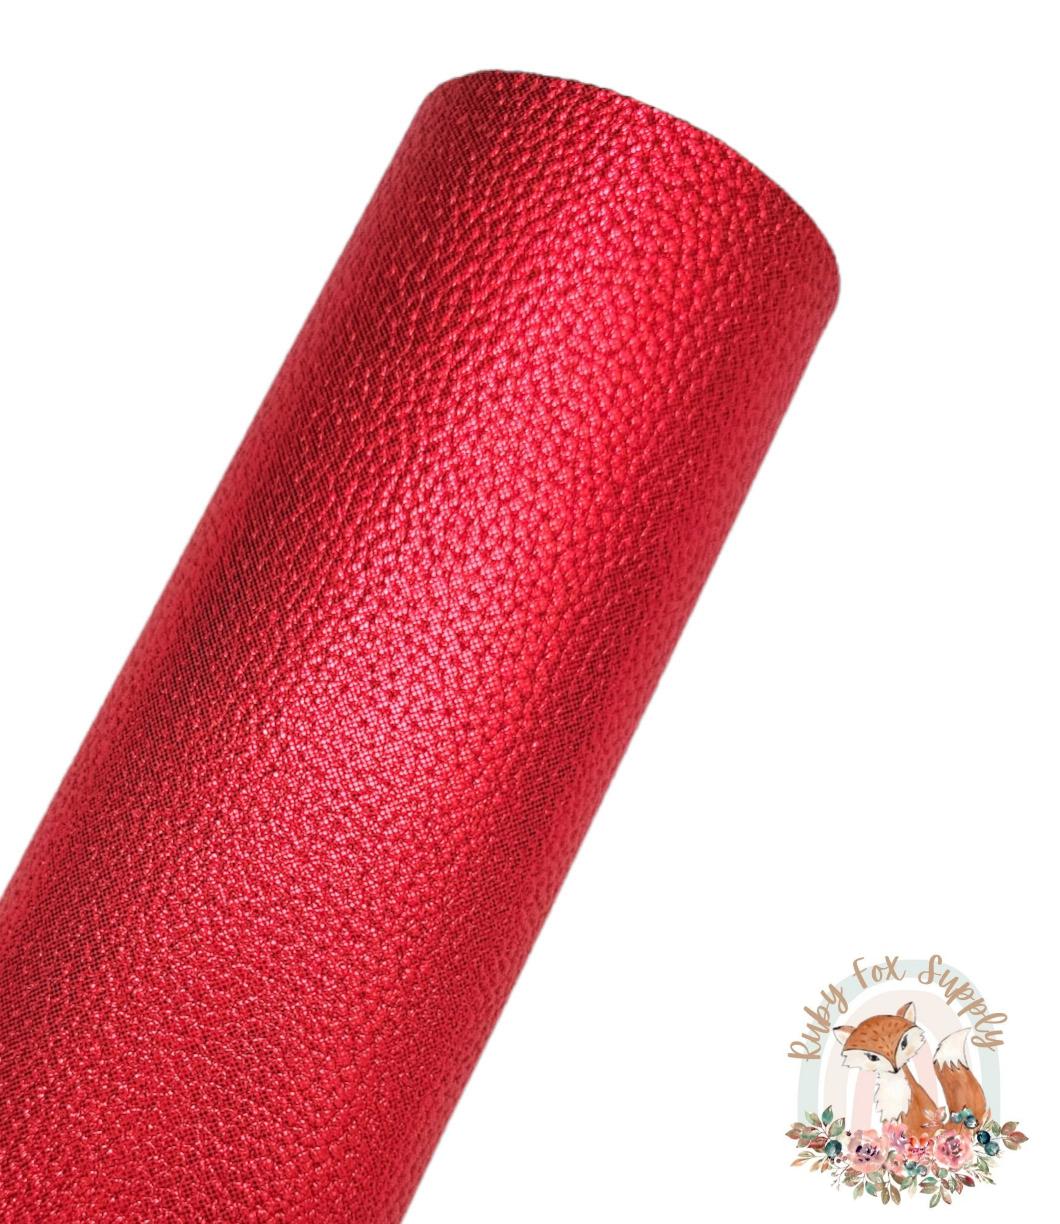 Shimmer Red Pebbled 9x12 faux leather sheet